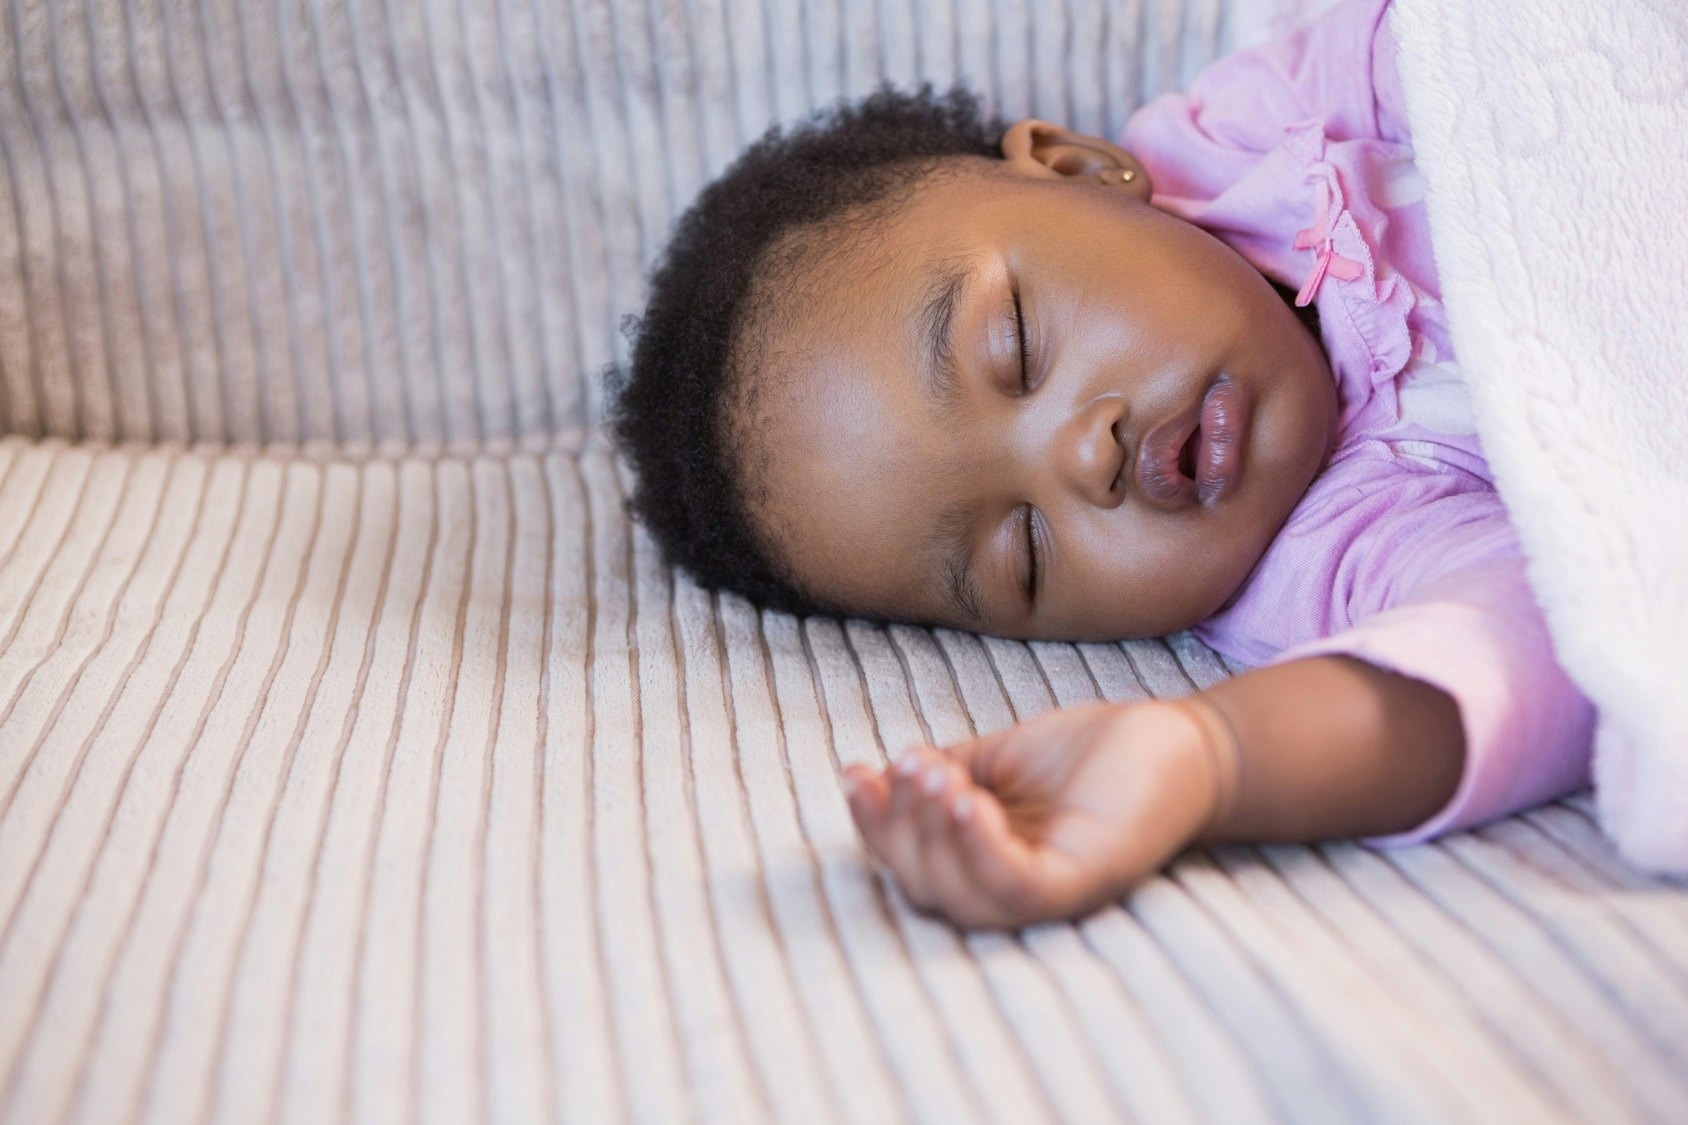 Reclaim your bedroom: How to get your kids to sleep in their bed